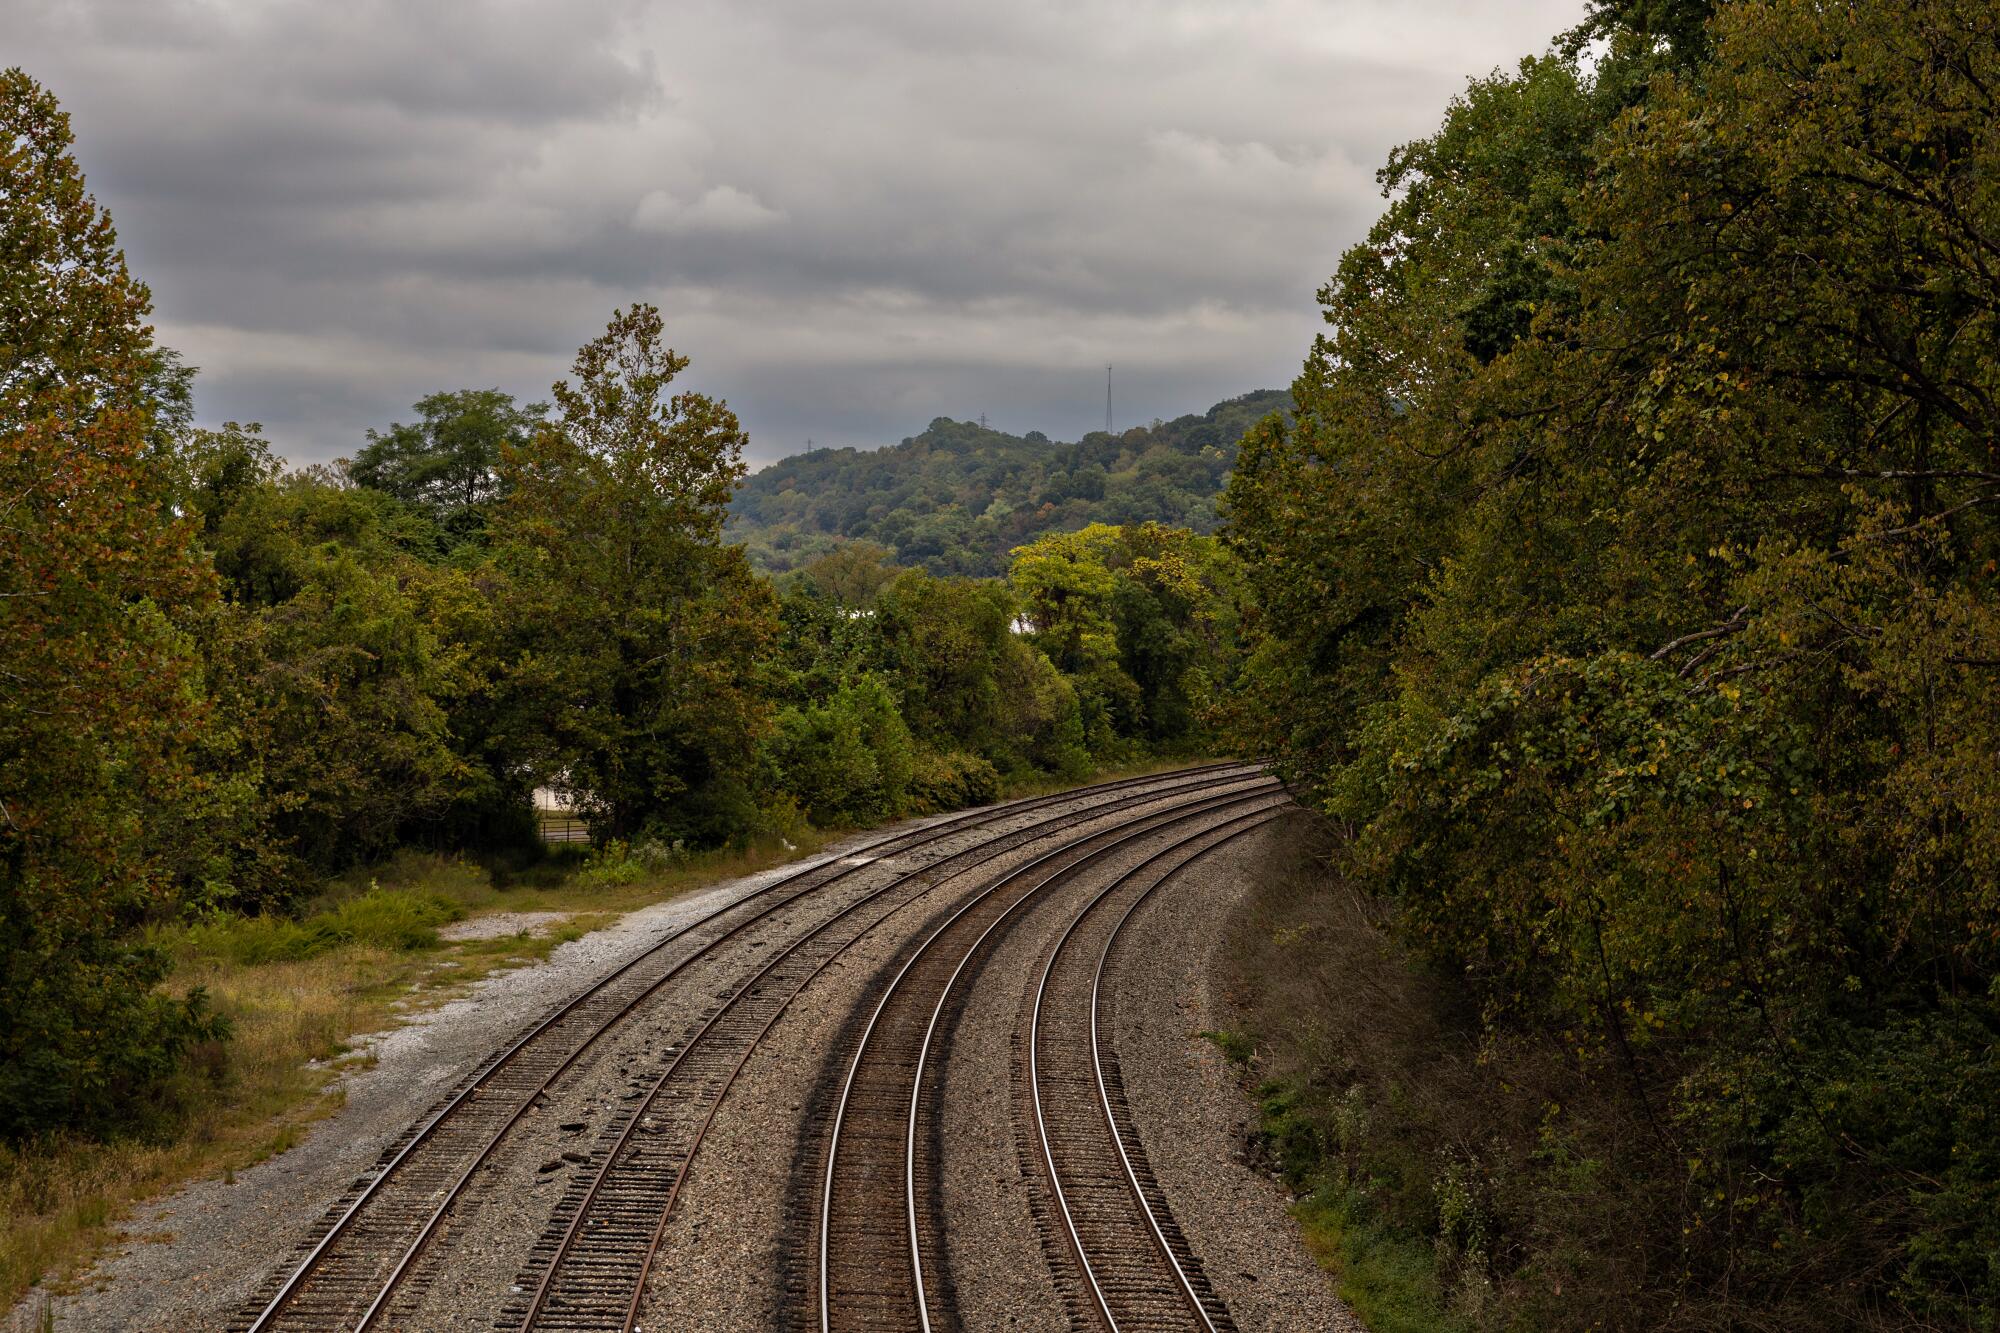 Rows of railroad track wind their way through the town of Huntington, West Virginia.